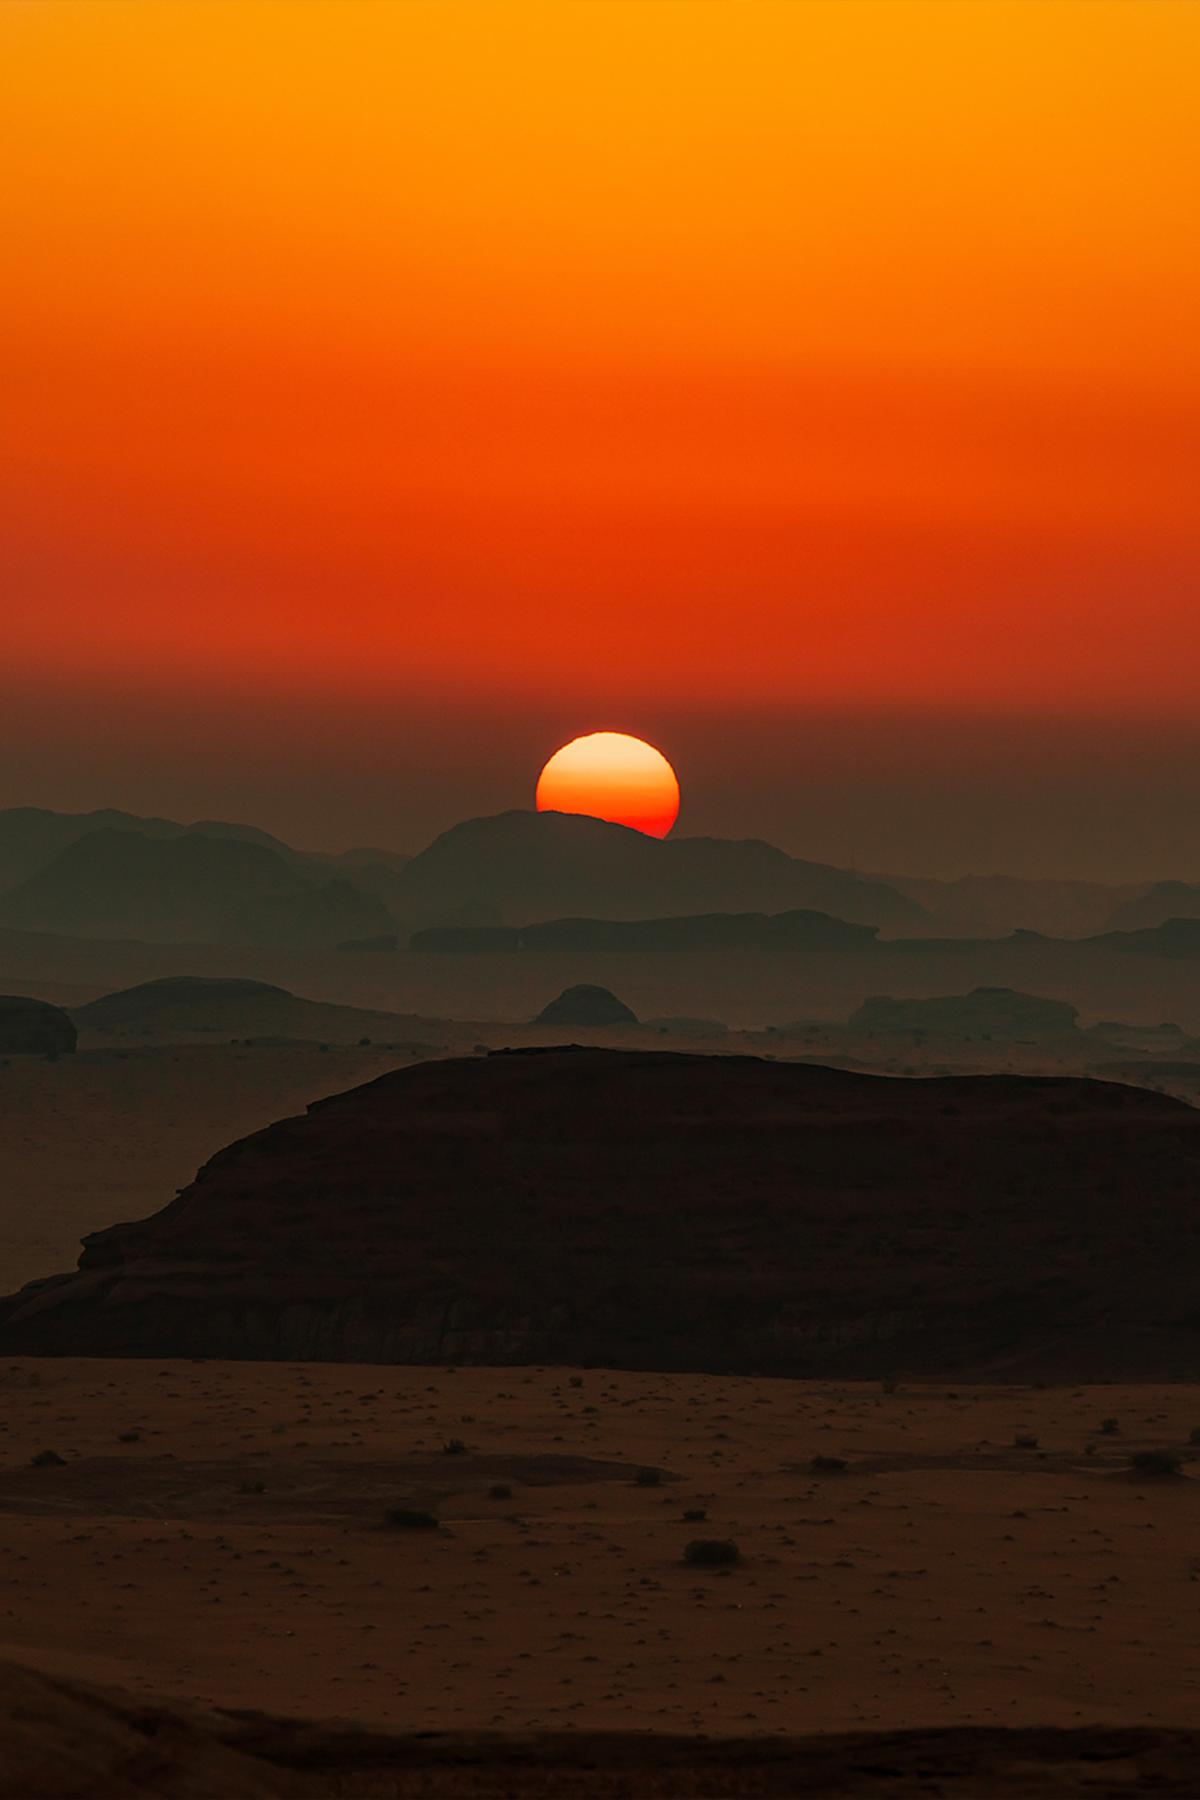 Sunset in middle east by NEOM